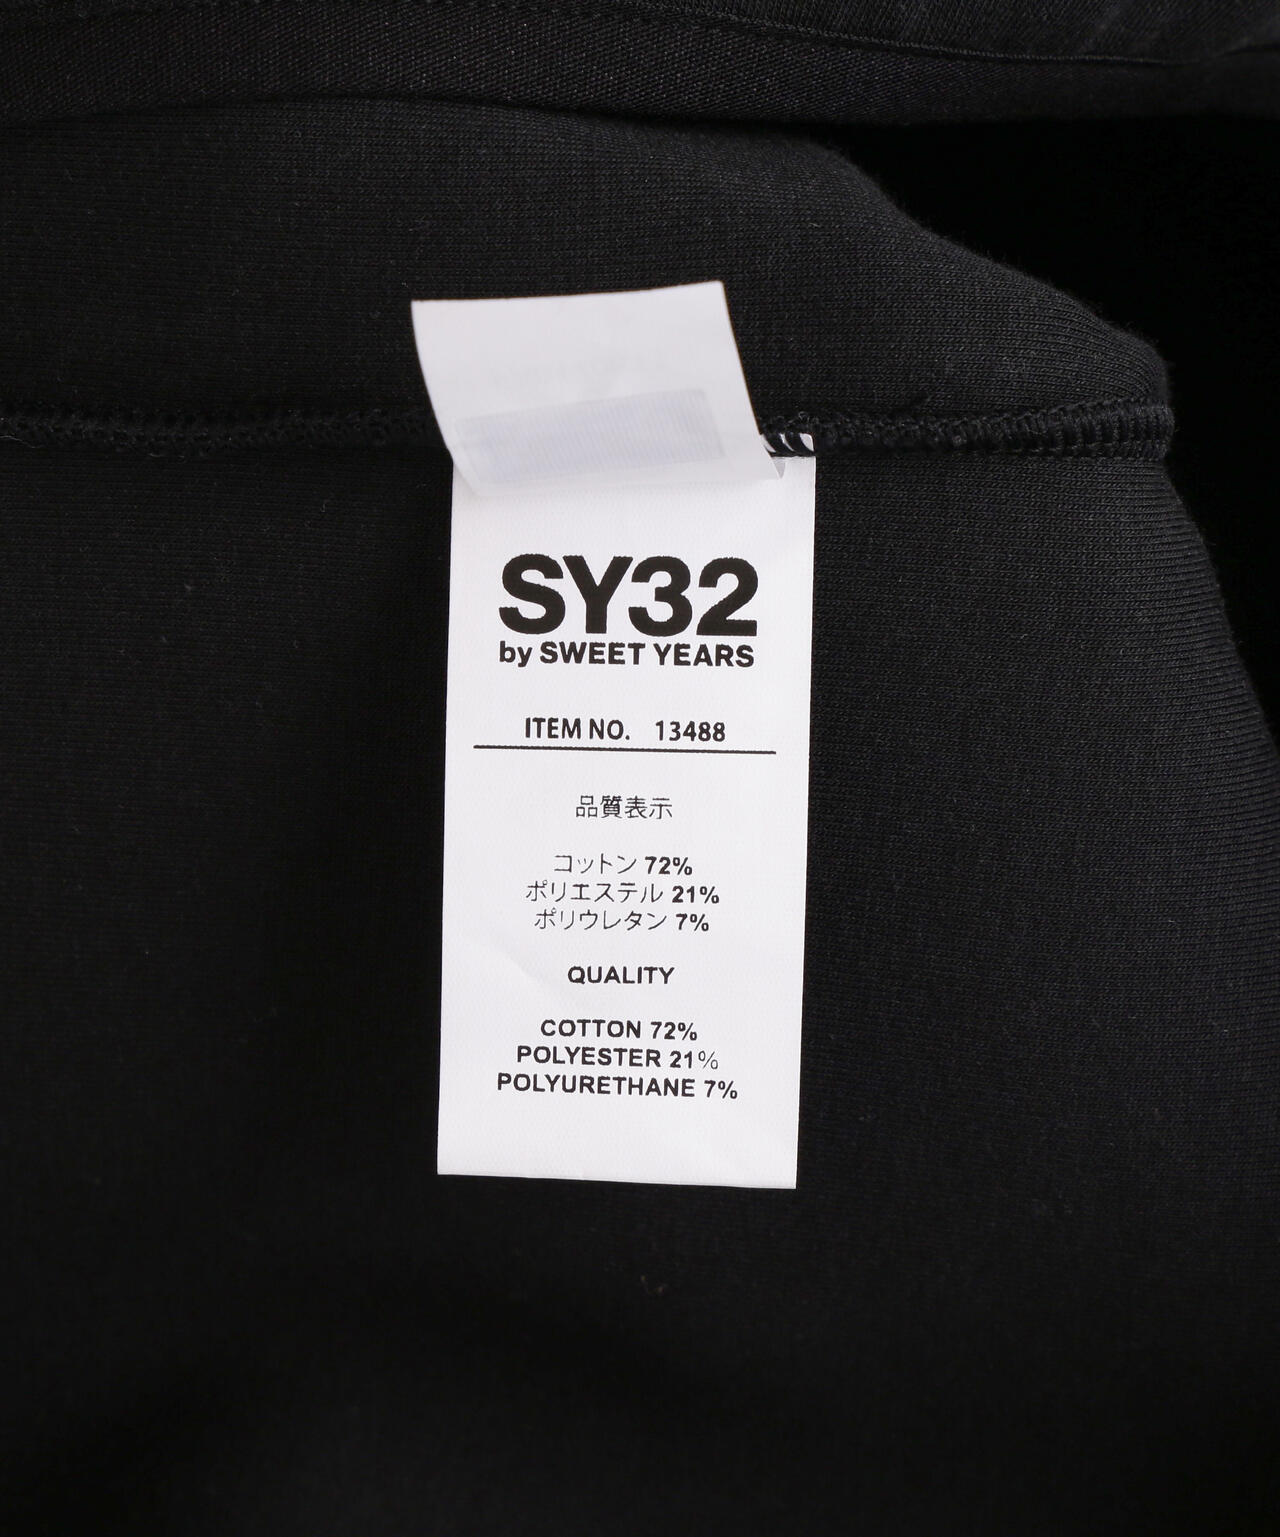 SY32 by SWEET YEARS /エスワイサーティトゥ バイ スィートイヤーズ/DOUBLE KNIT HEAVY P/O CRE